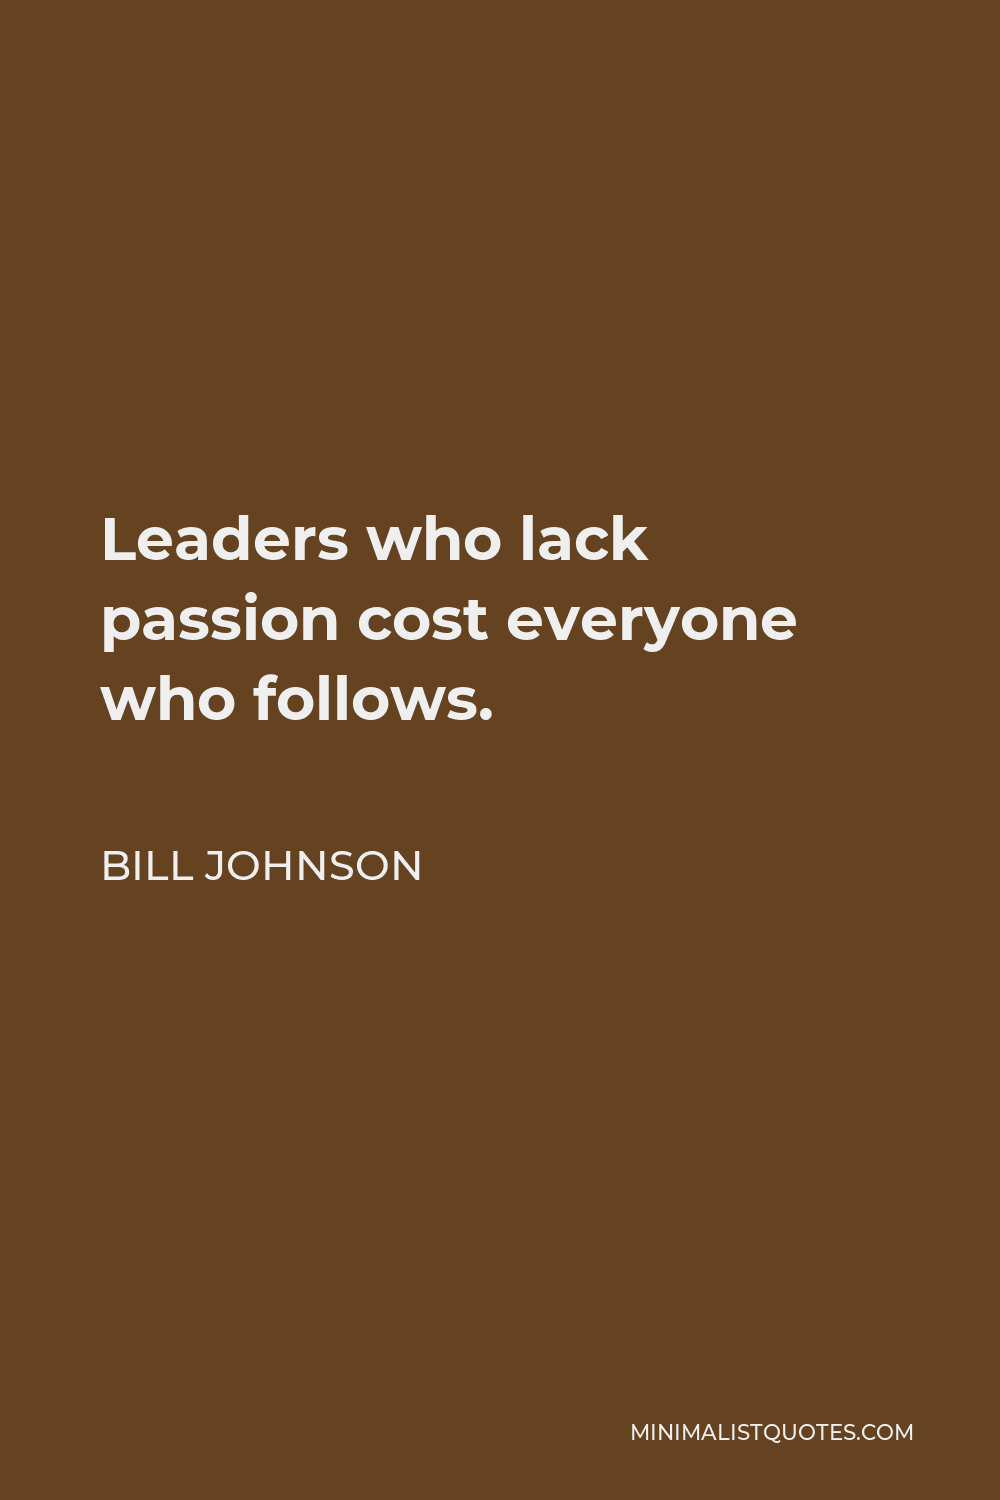 Bill Johnson Quote - Leaders who lack passion cost everyone who follows.